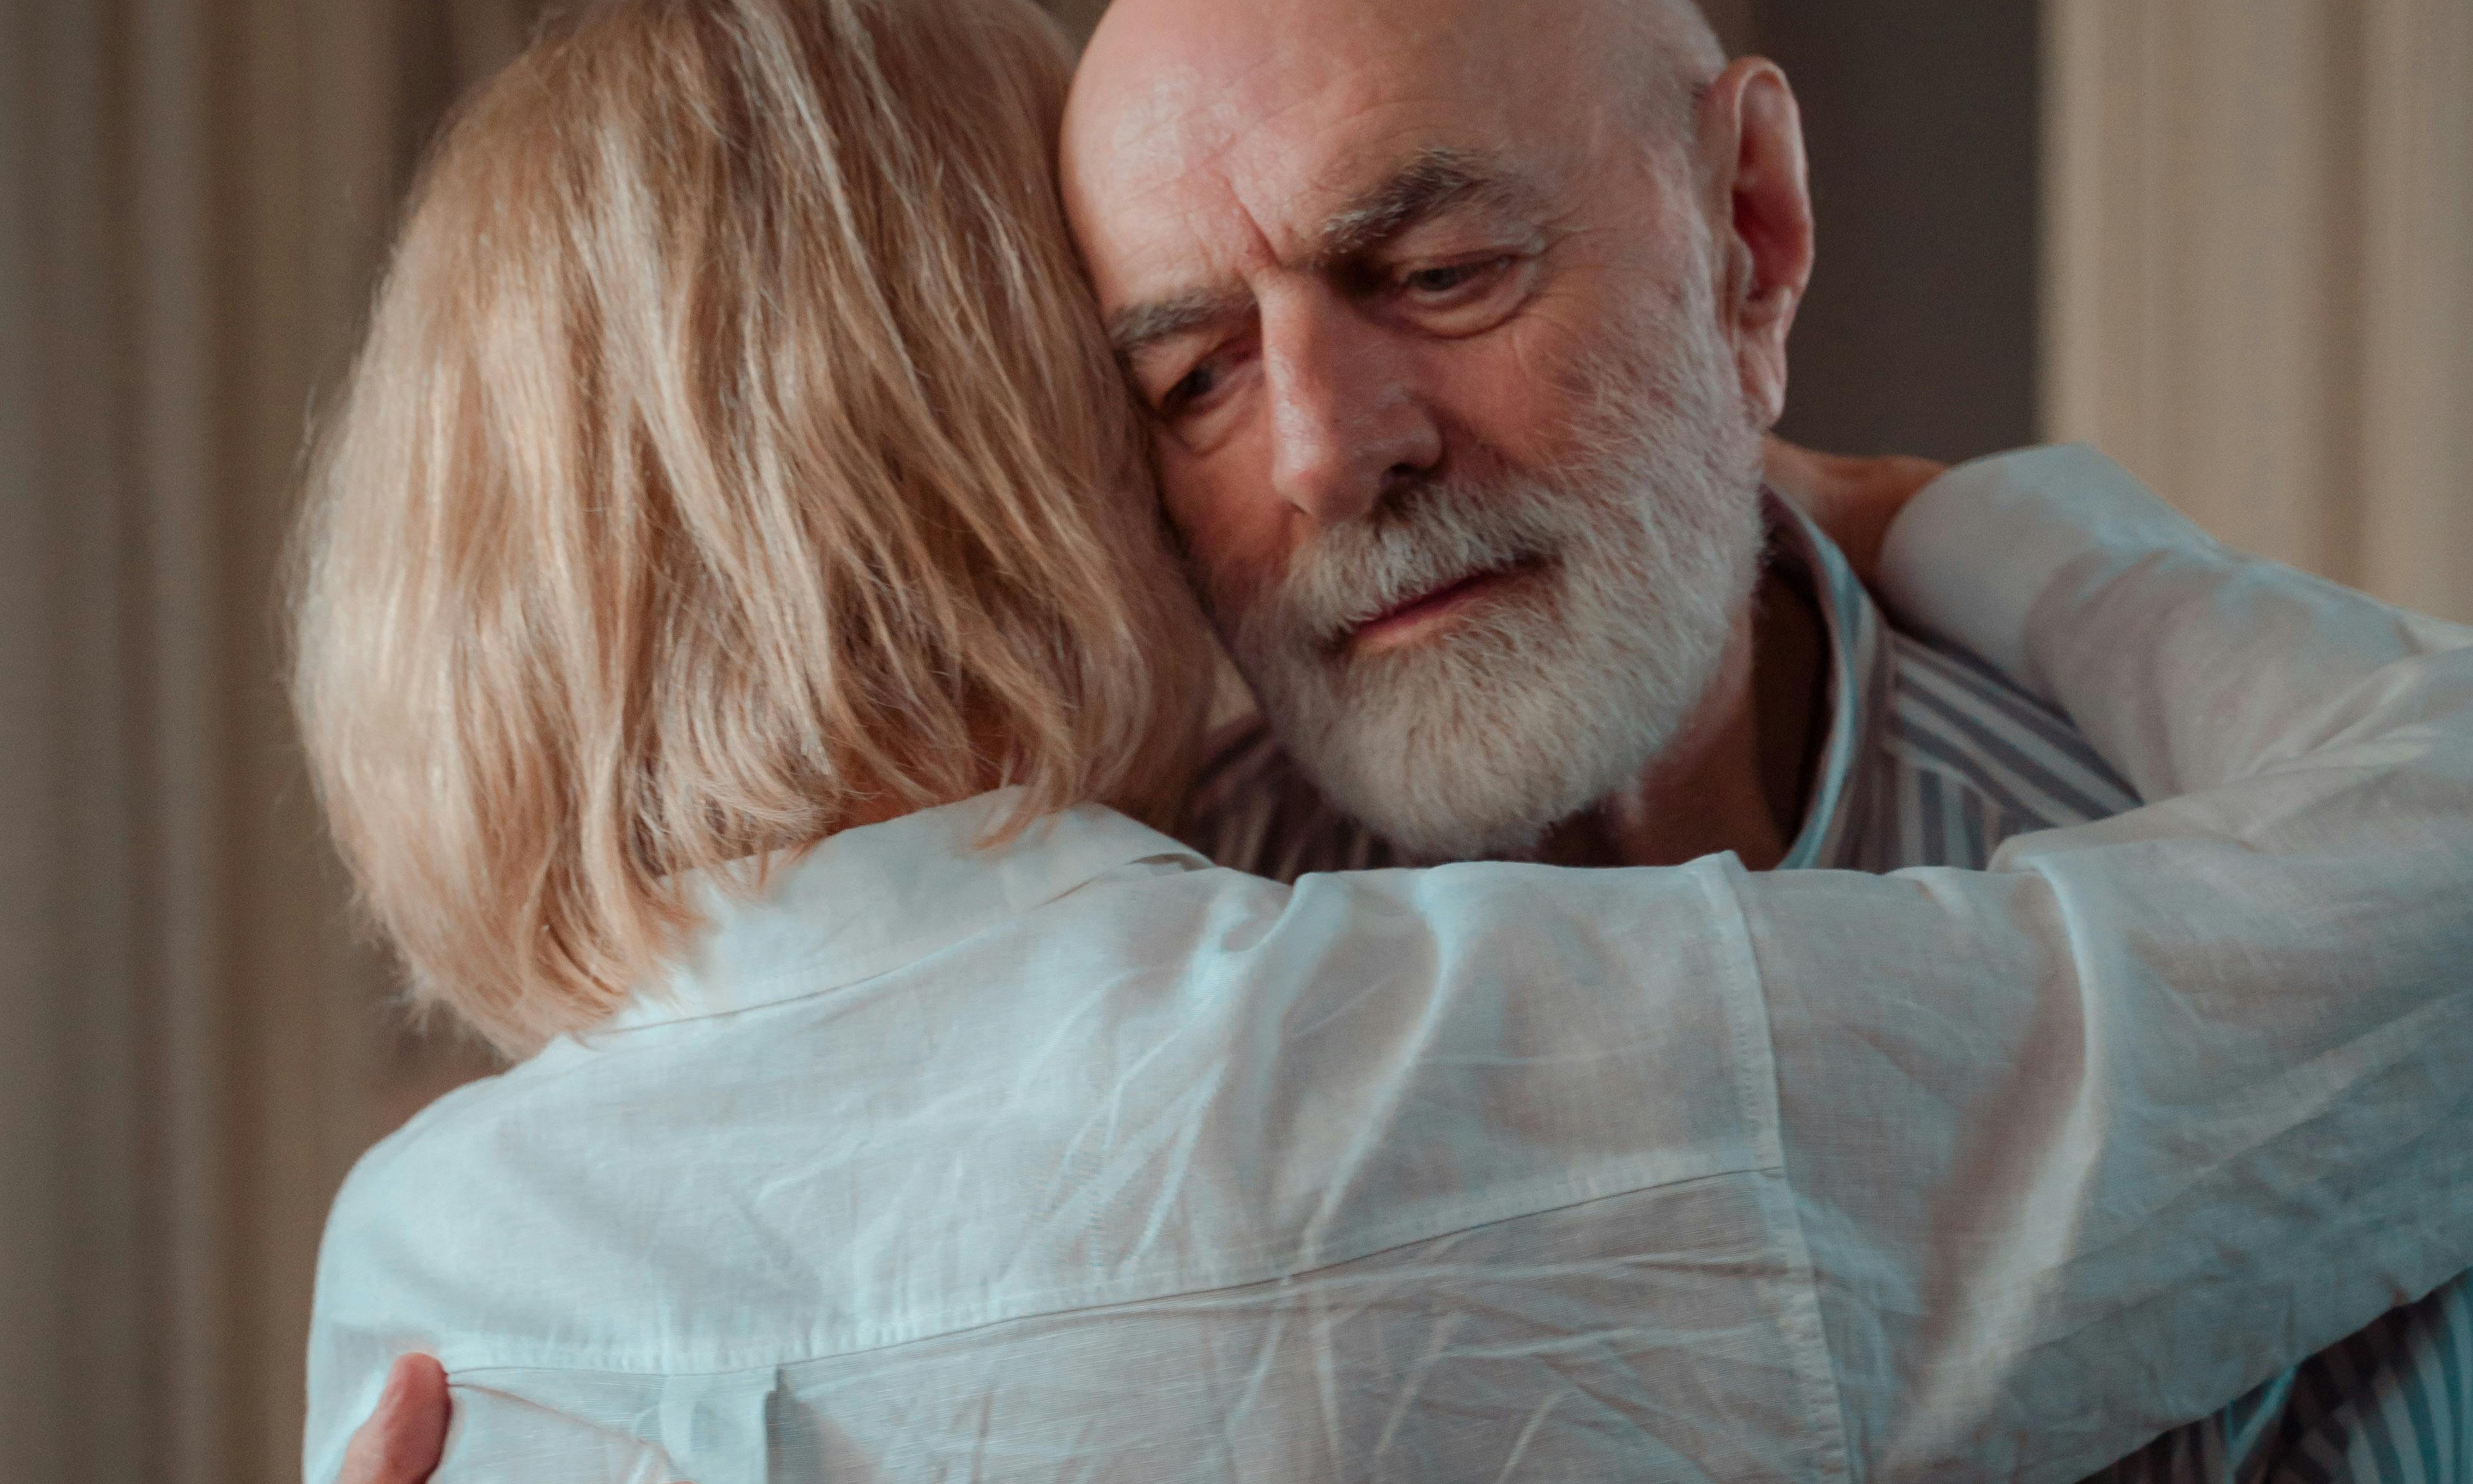 Harold comforting Margaret and welcoming her into his home | Source: Pexels